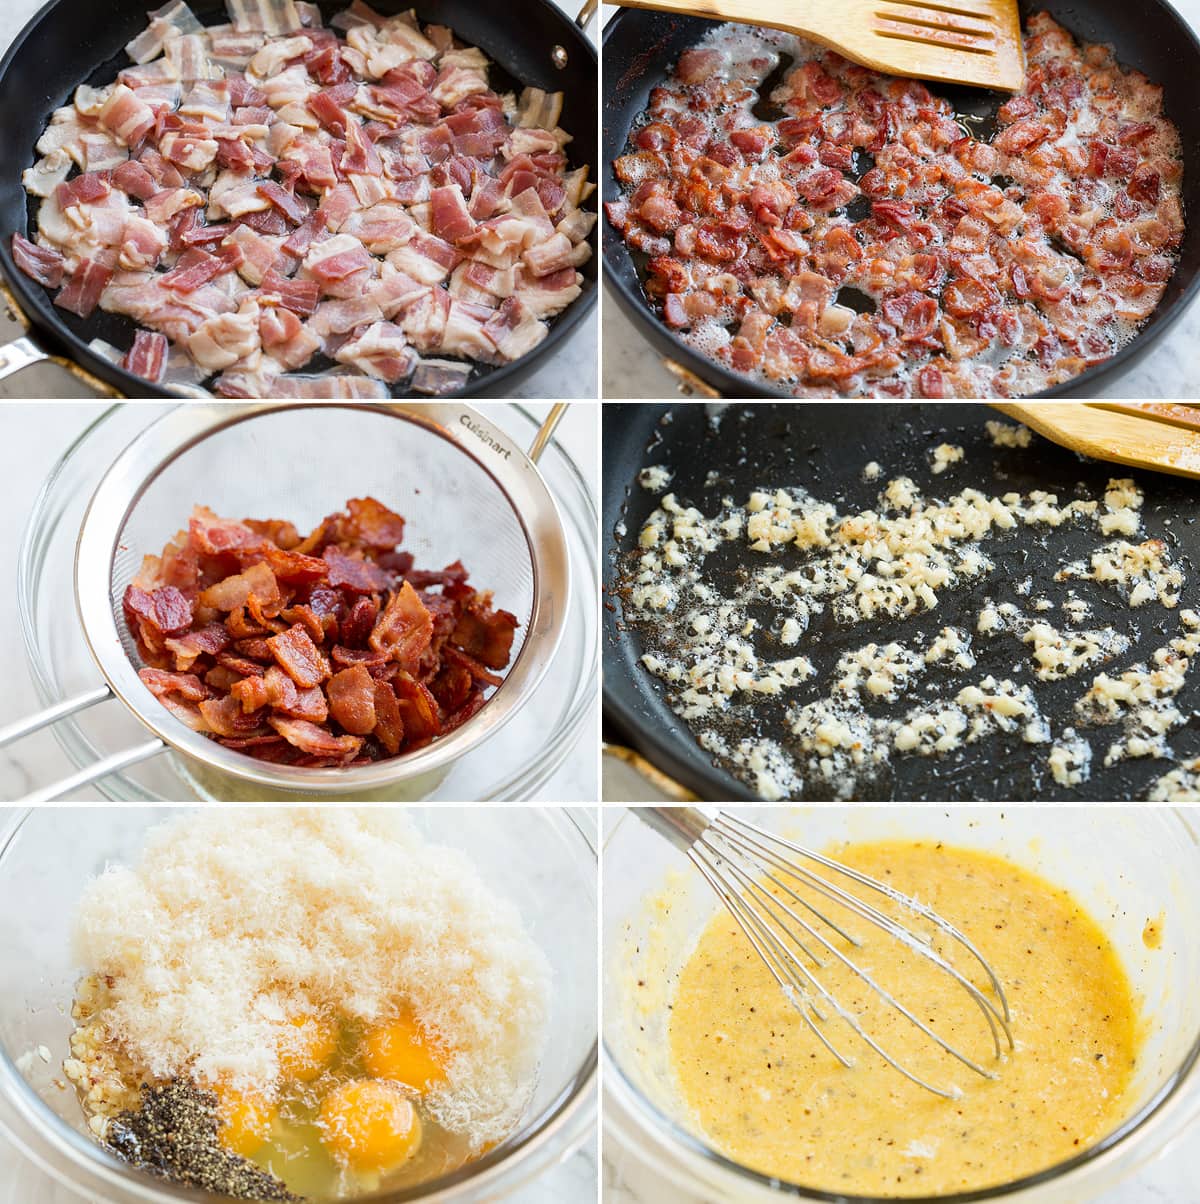 Collage of six images showing steps to make pasta carbonara. Includes sauteing bacon in a skillet, straining rendered fat into a bowl, sauteing garlic, and preparing carbonara sauce.